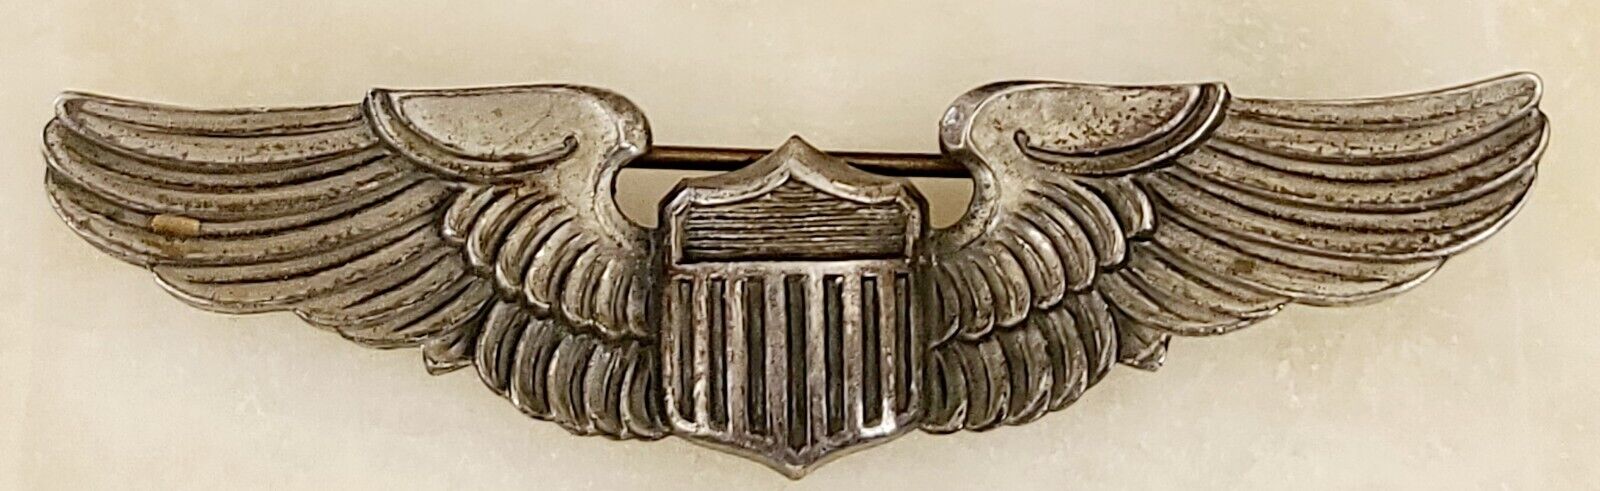 Wwii Era Usaaf Pilot Wings 3" Sterling Silver Amico